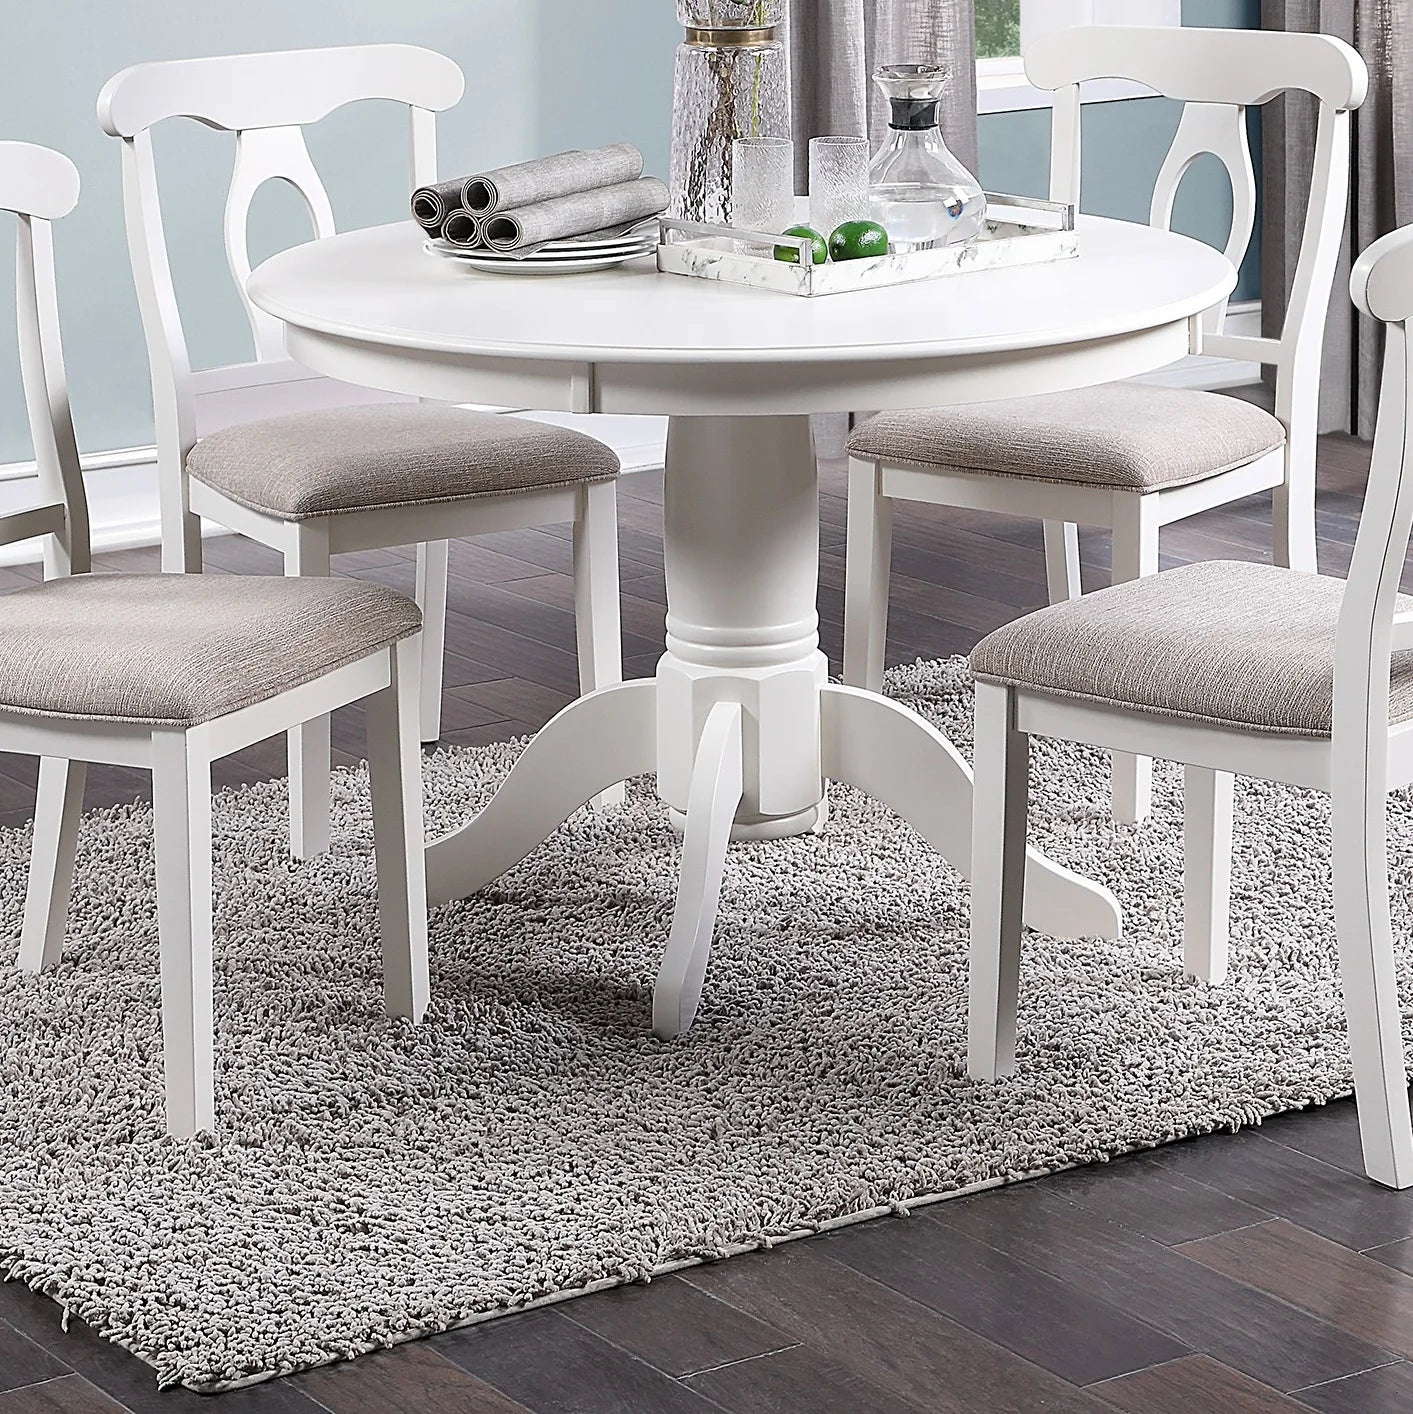 Classic Design Dining Room 5pc Set Round Table 4x side Chairs Cushion Fabric Upholstery Seat Rubberwood Furniture